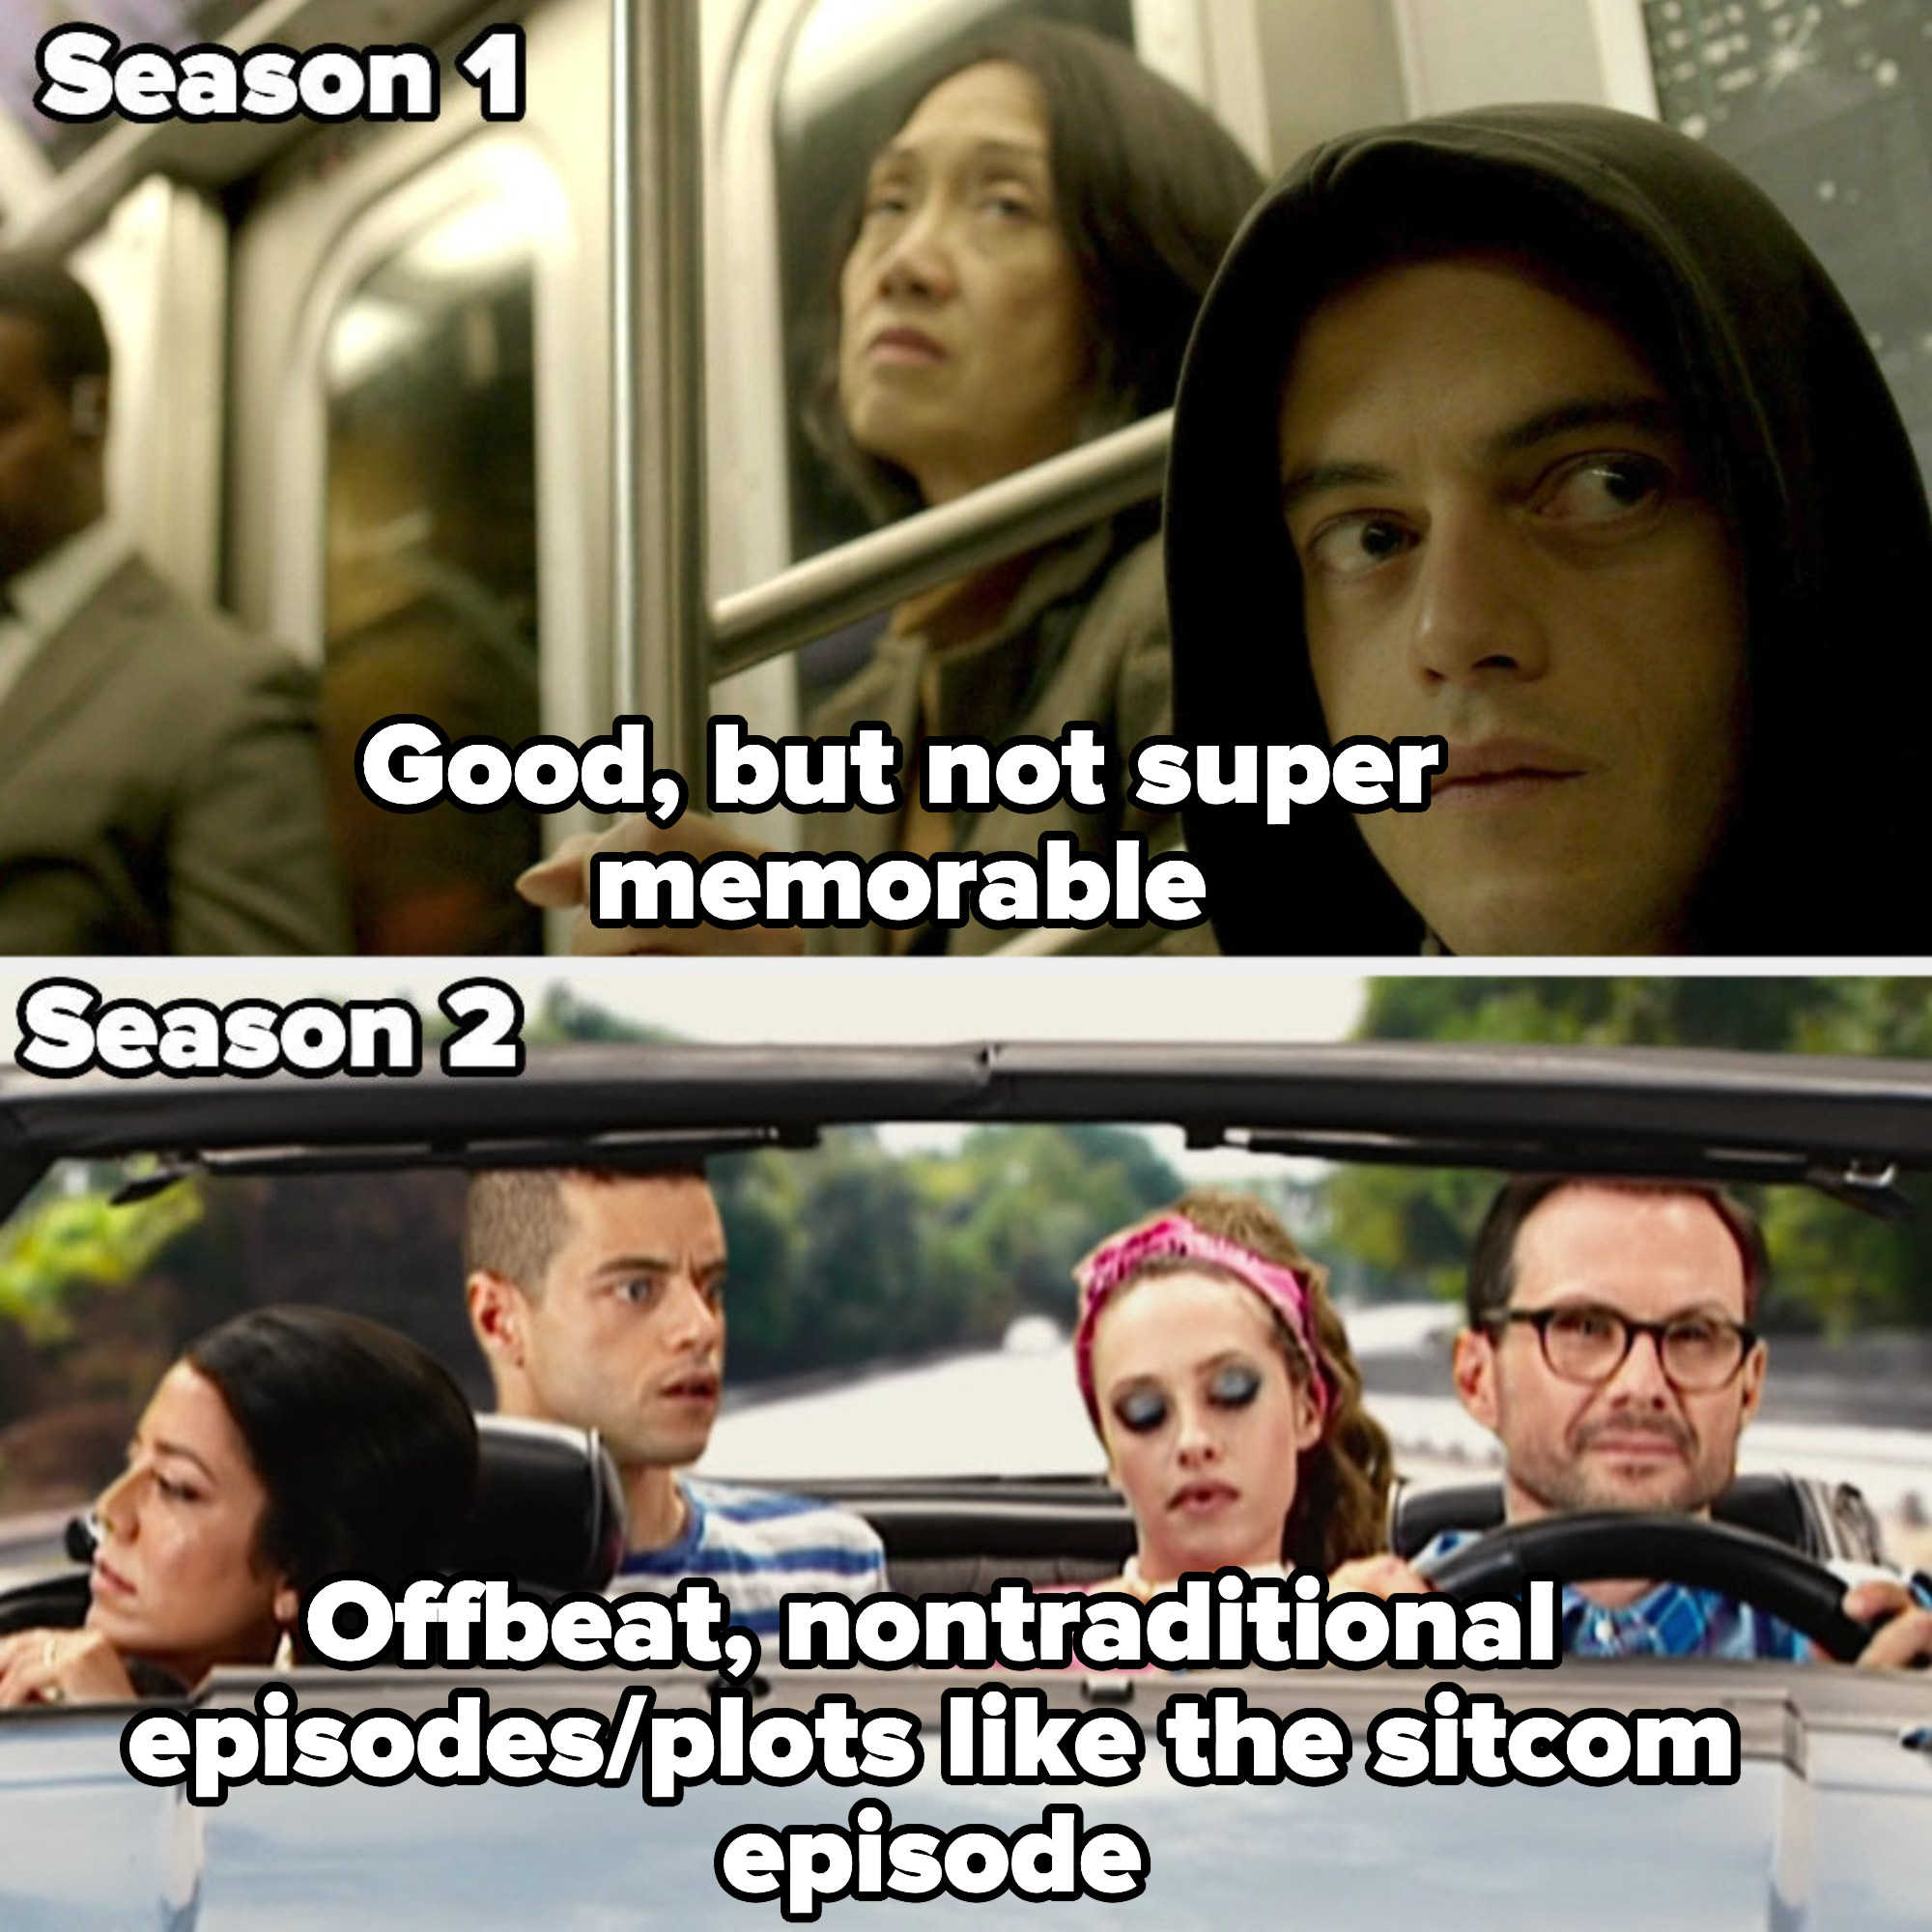 Season 1 labeled &quot;Good, but not super memorable&quot; and season 2 labeled &quot;offbeat, nontraditional episodes/plots like the sitcom episode